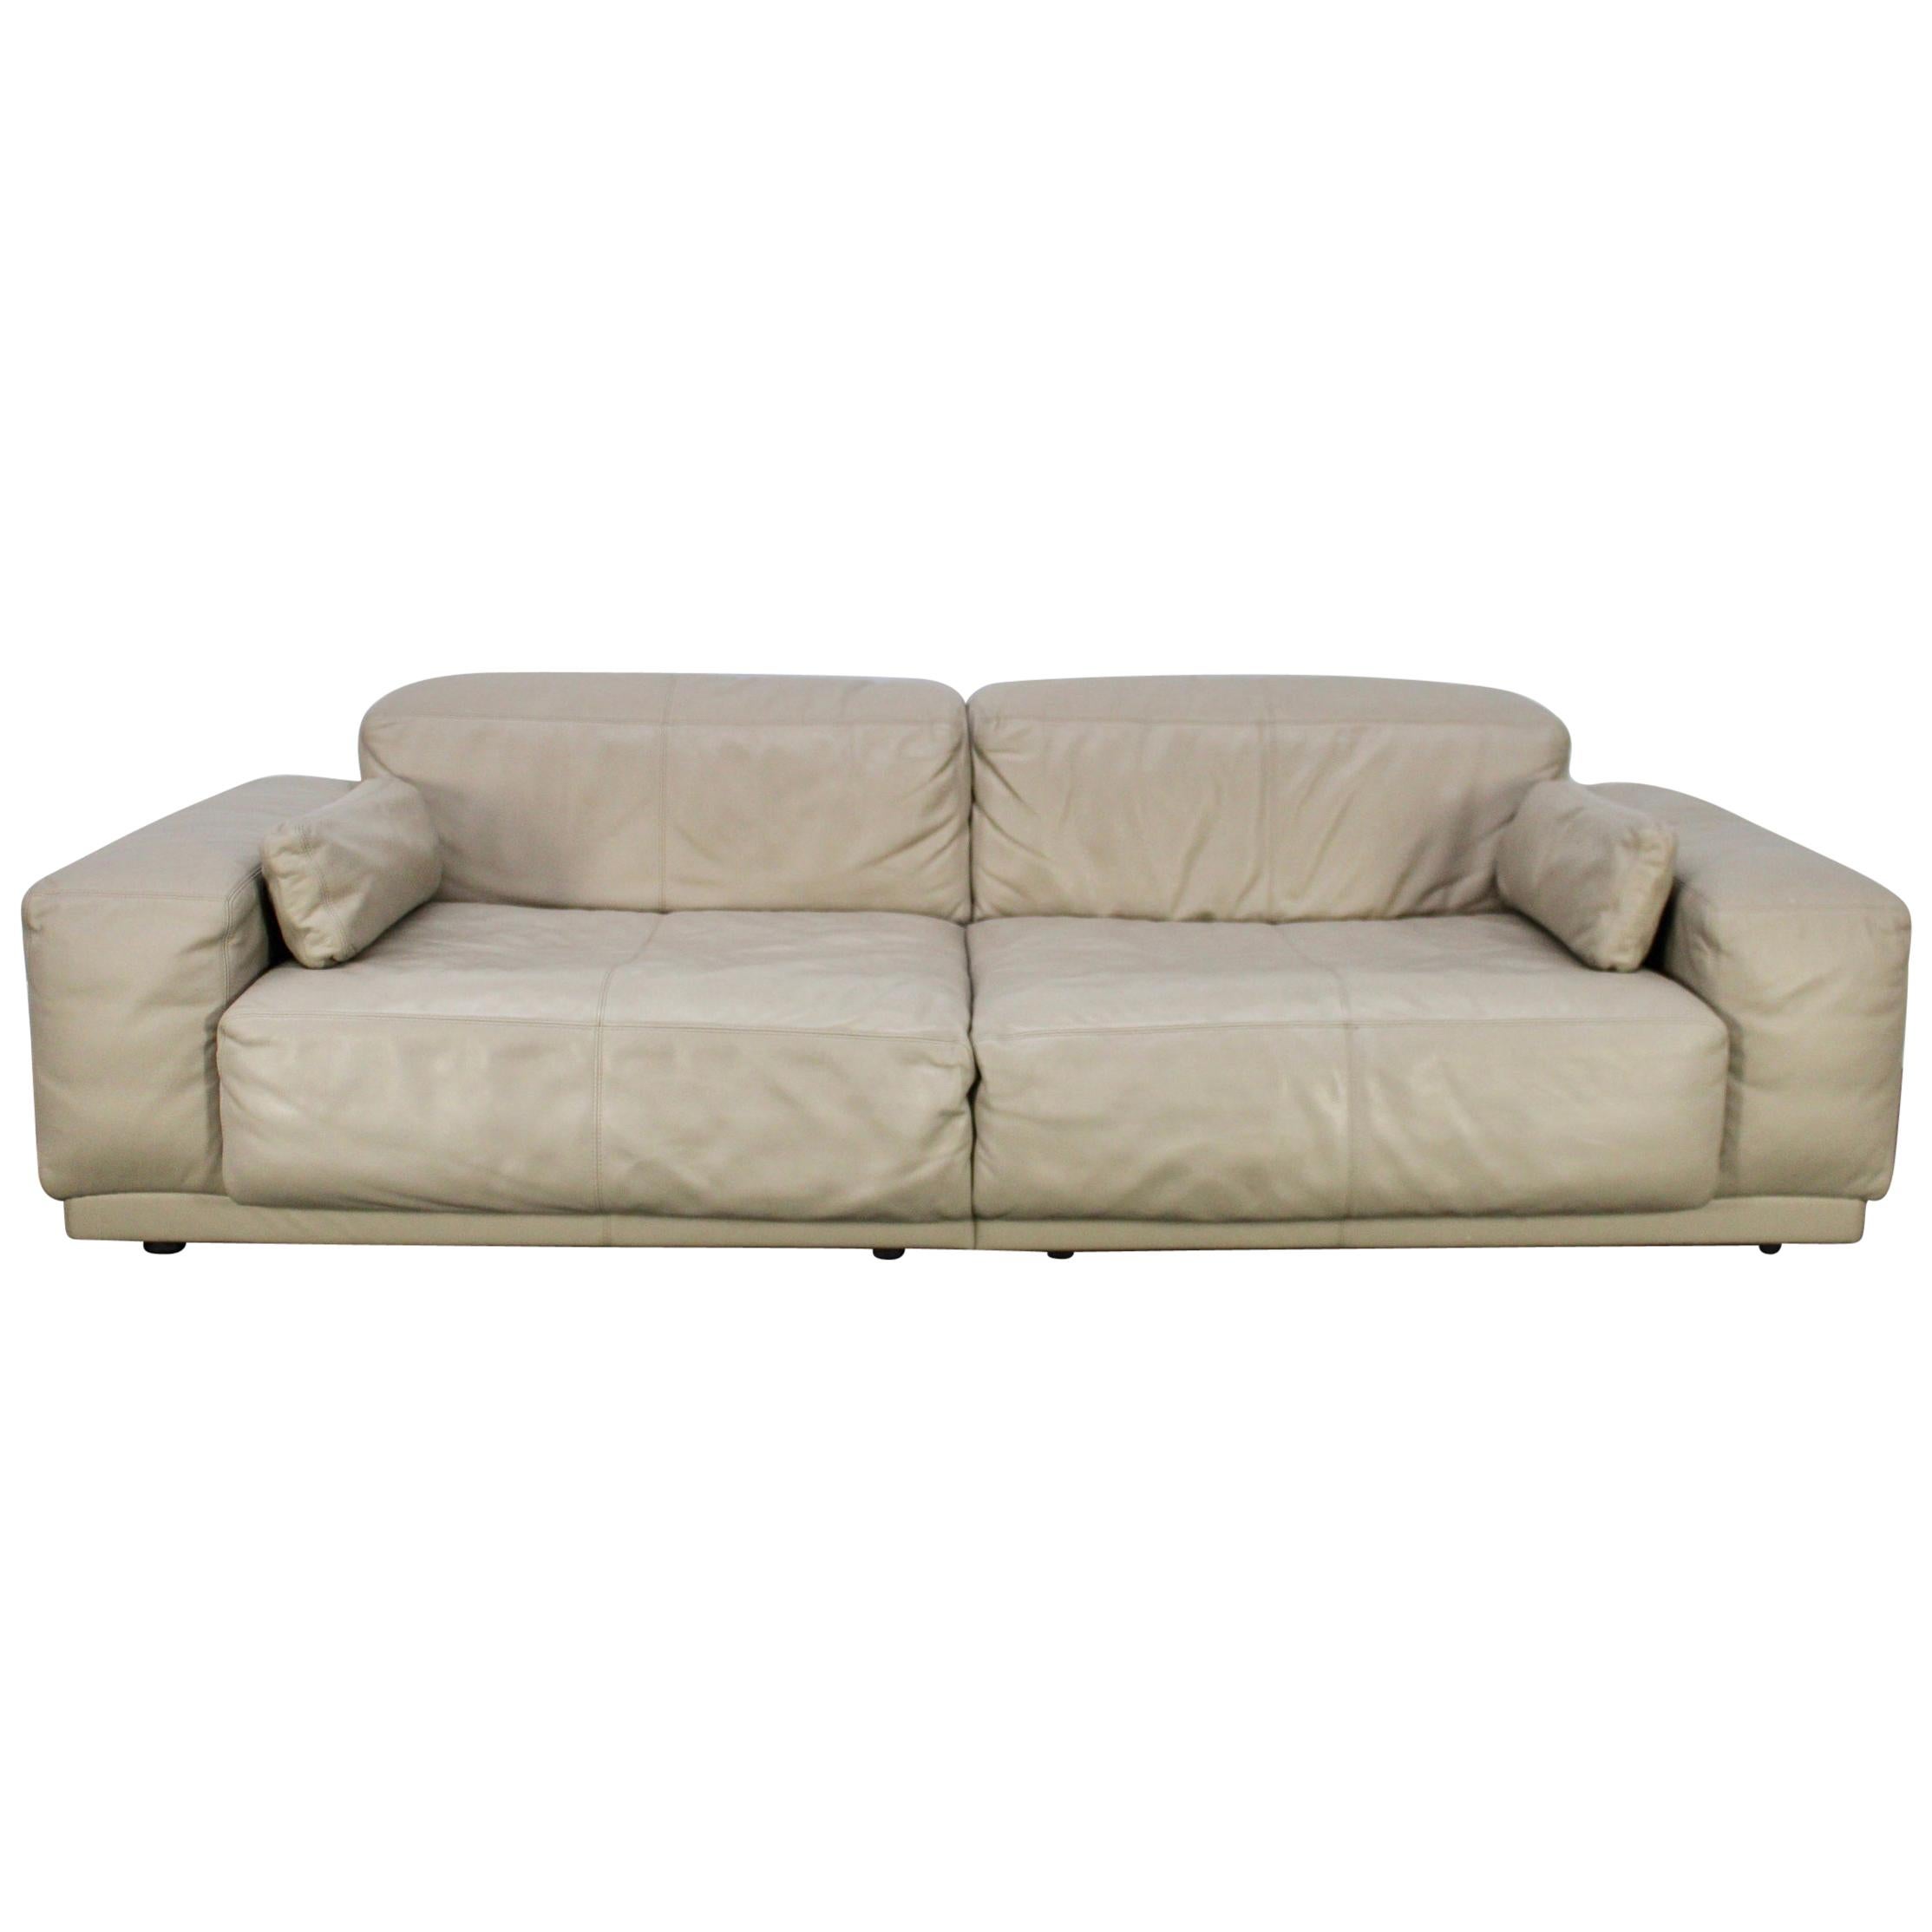 Vitra “Place” Two-Seat Sofa in Ivory Leather by Jasper Morrison